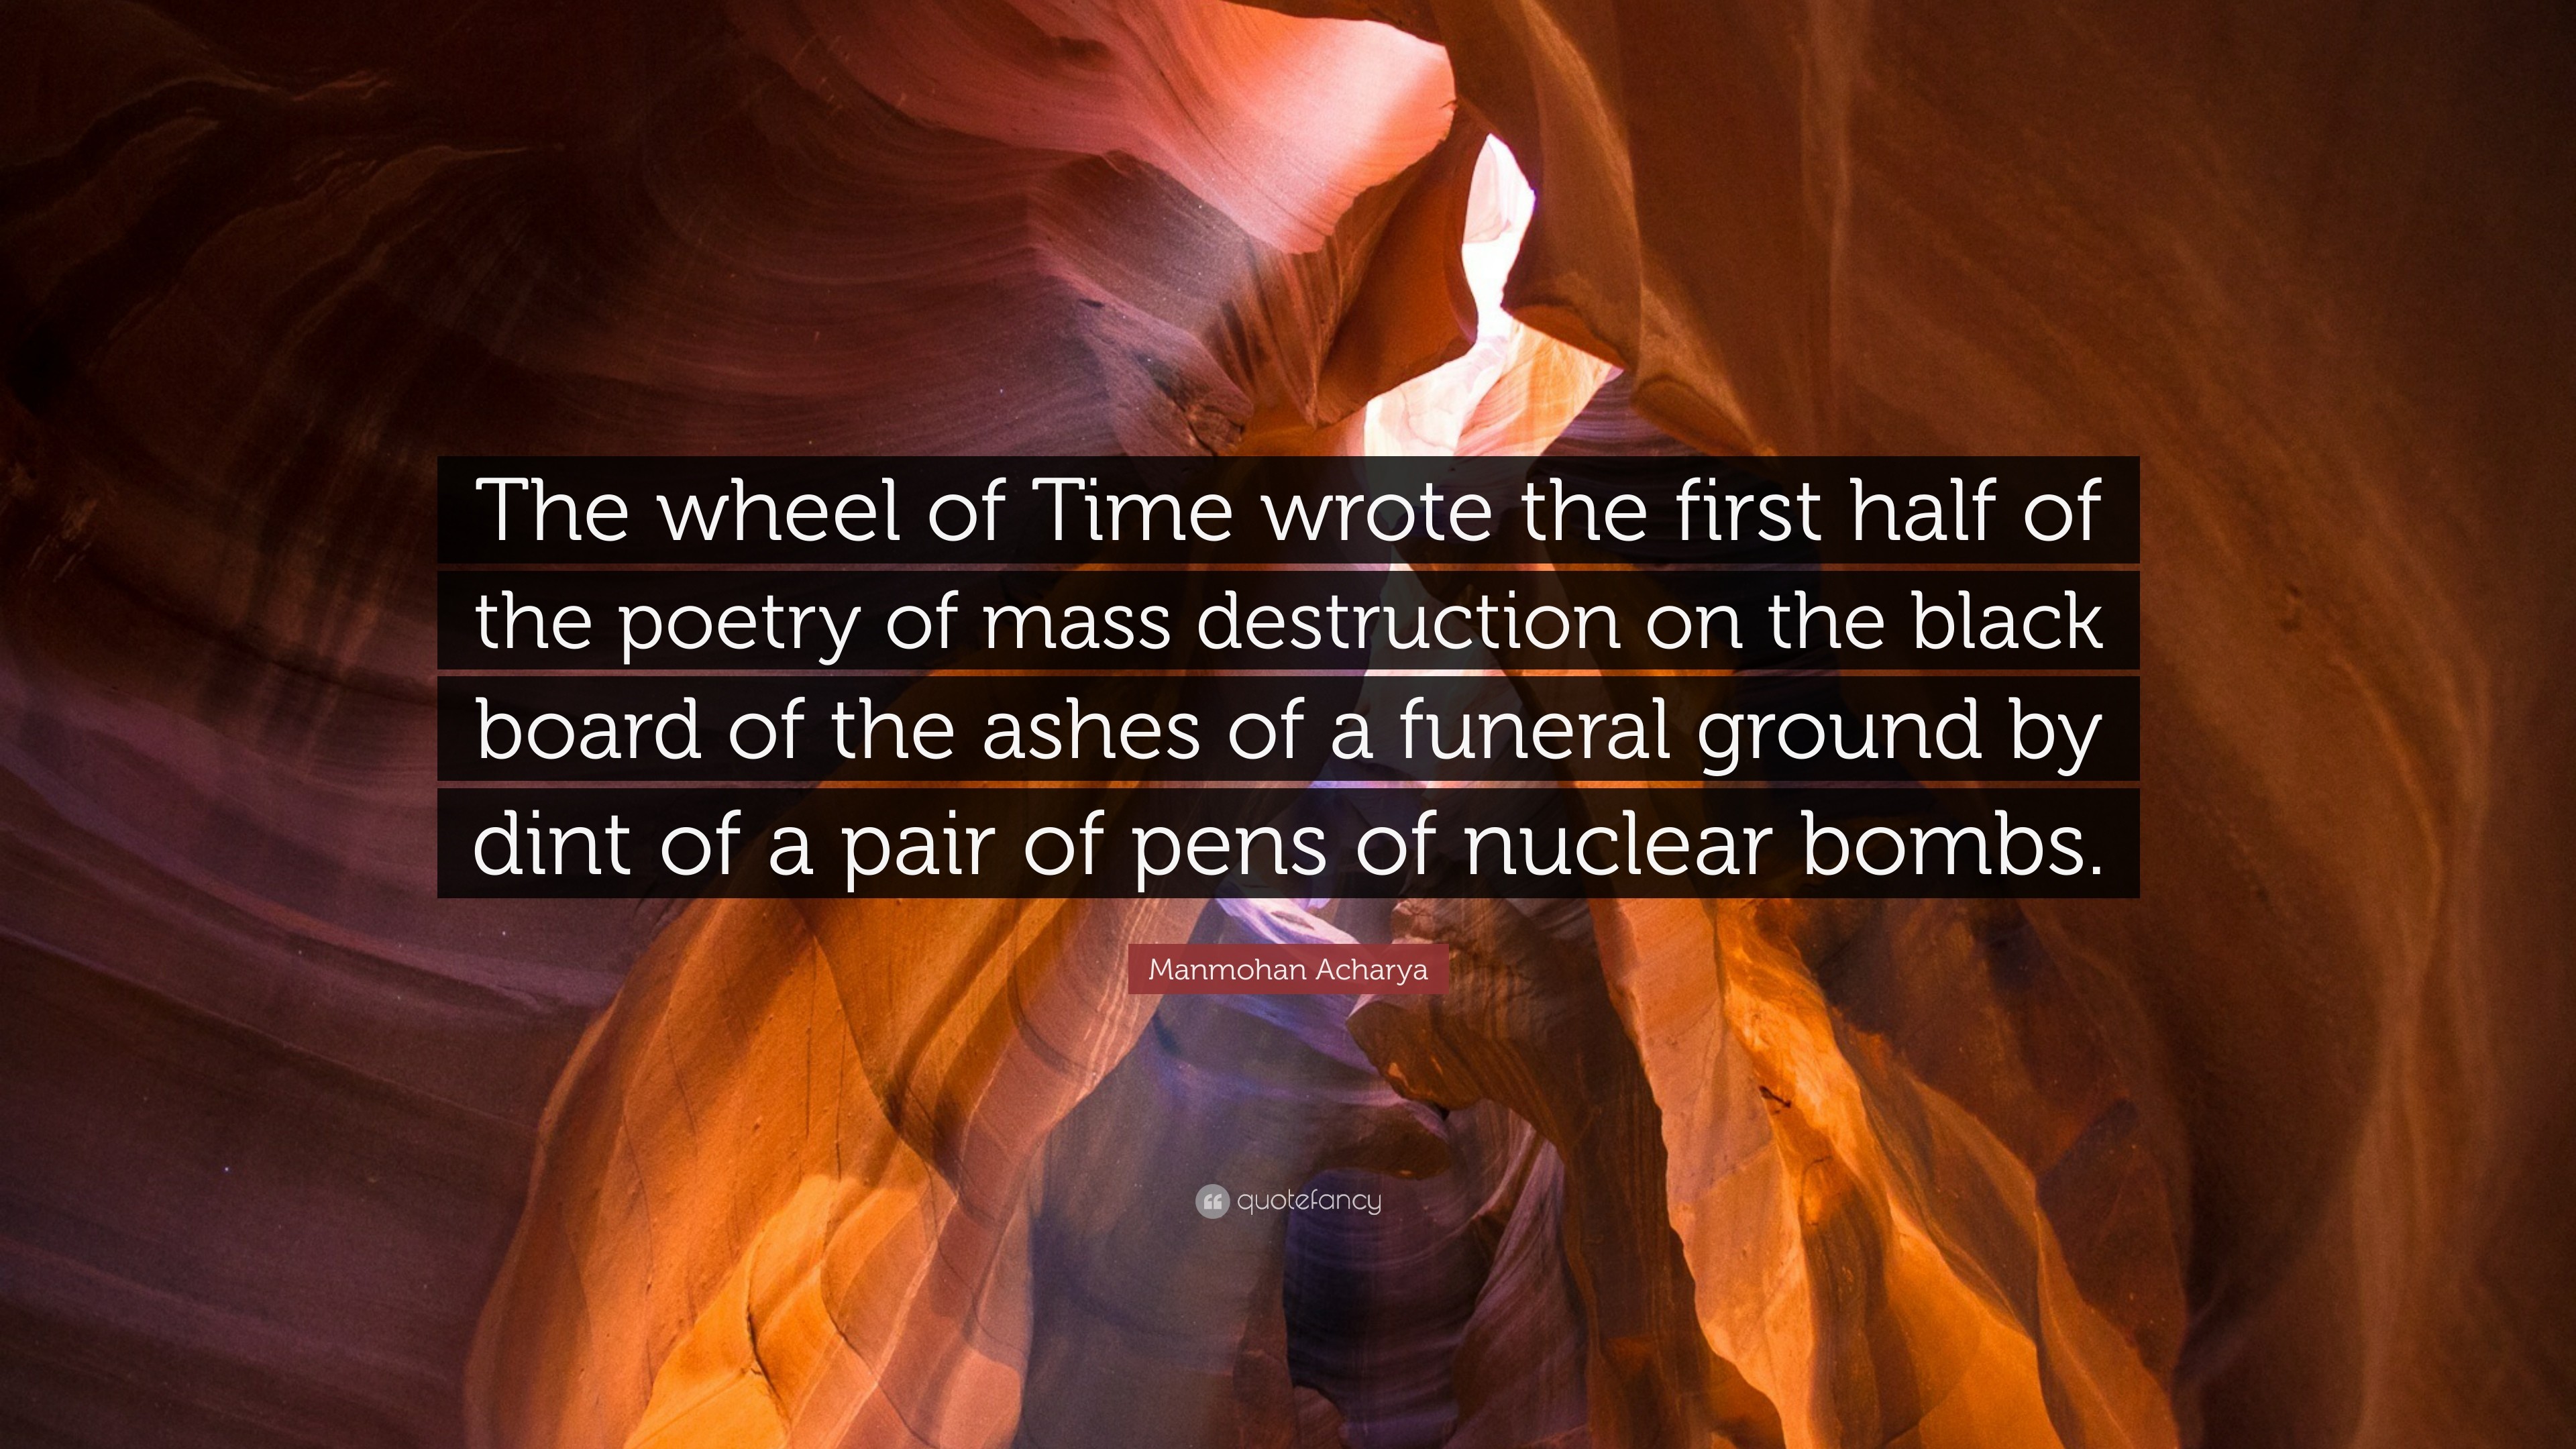 3840x2160 Manmohan Acharya Quote: “The wheel of Time wrote the first half of the  poetry